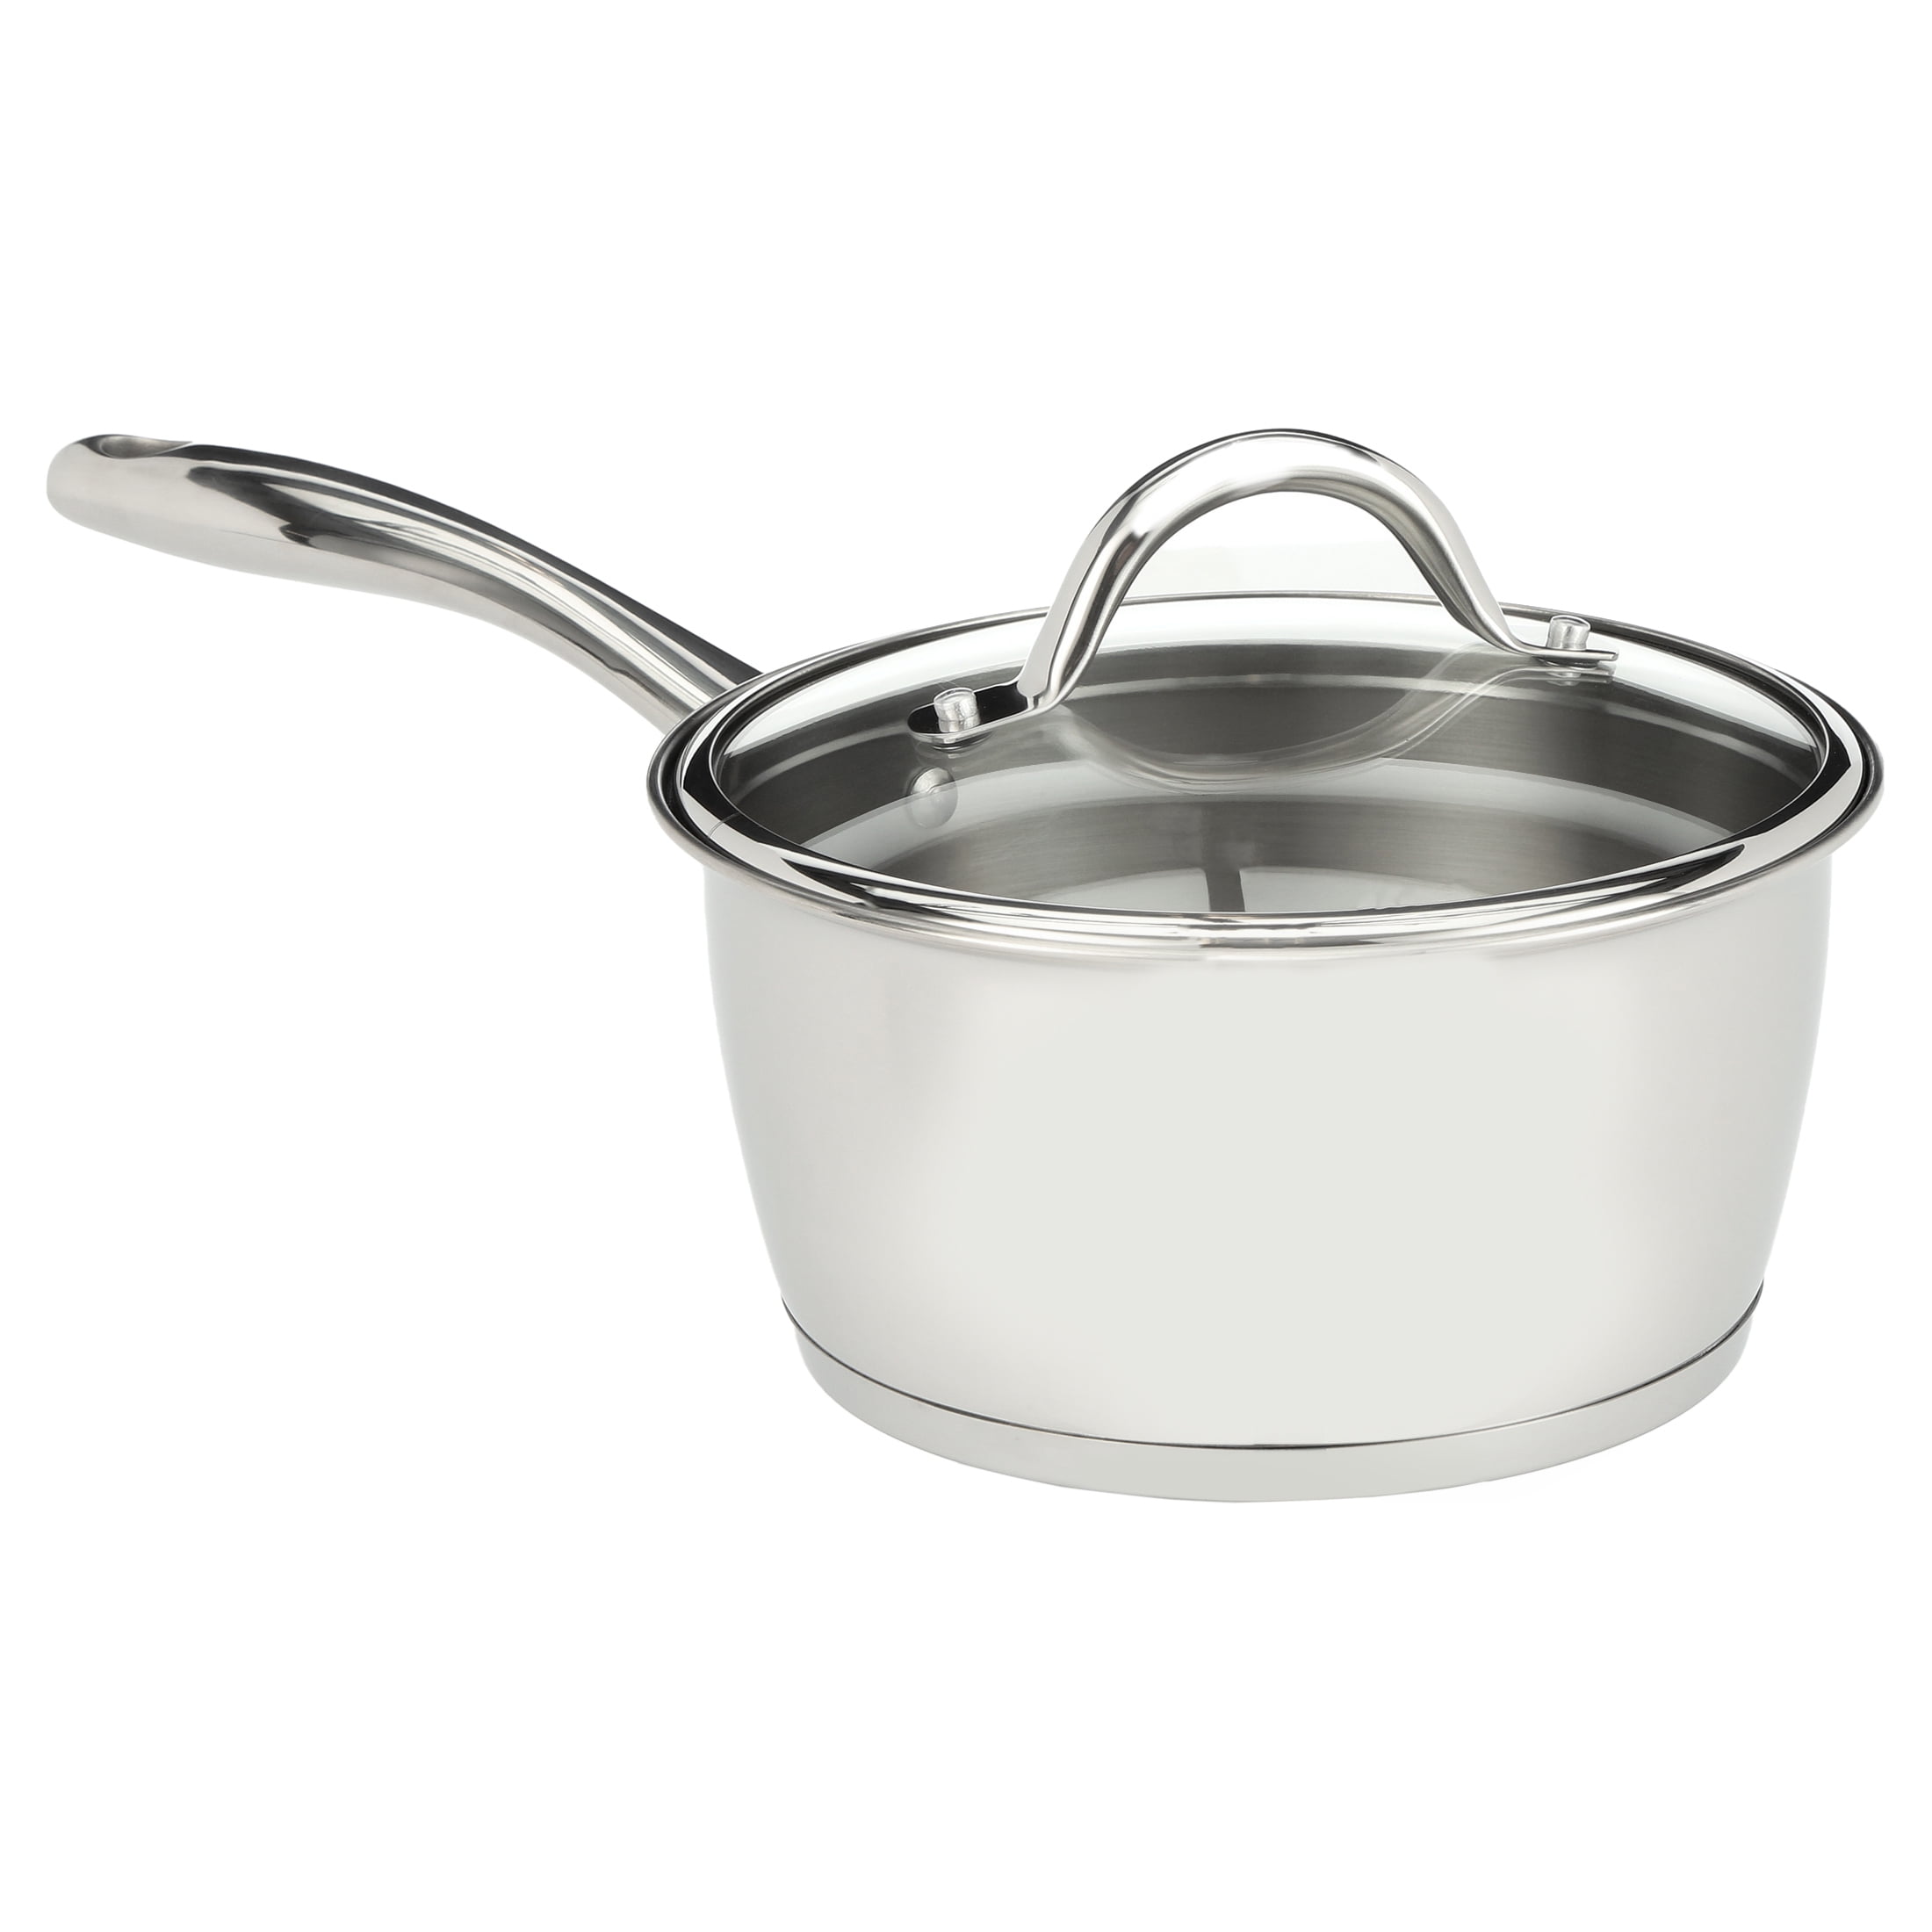 Tramontina Gourmet Prima 4-Quart Covered Sauce Pan with Tri-Ply Base 